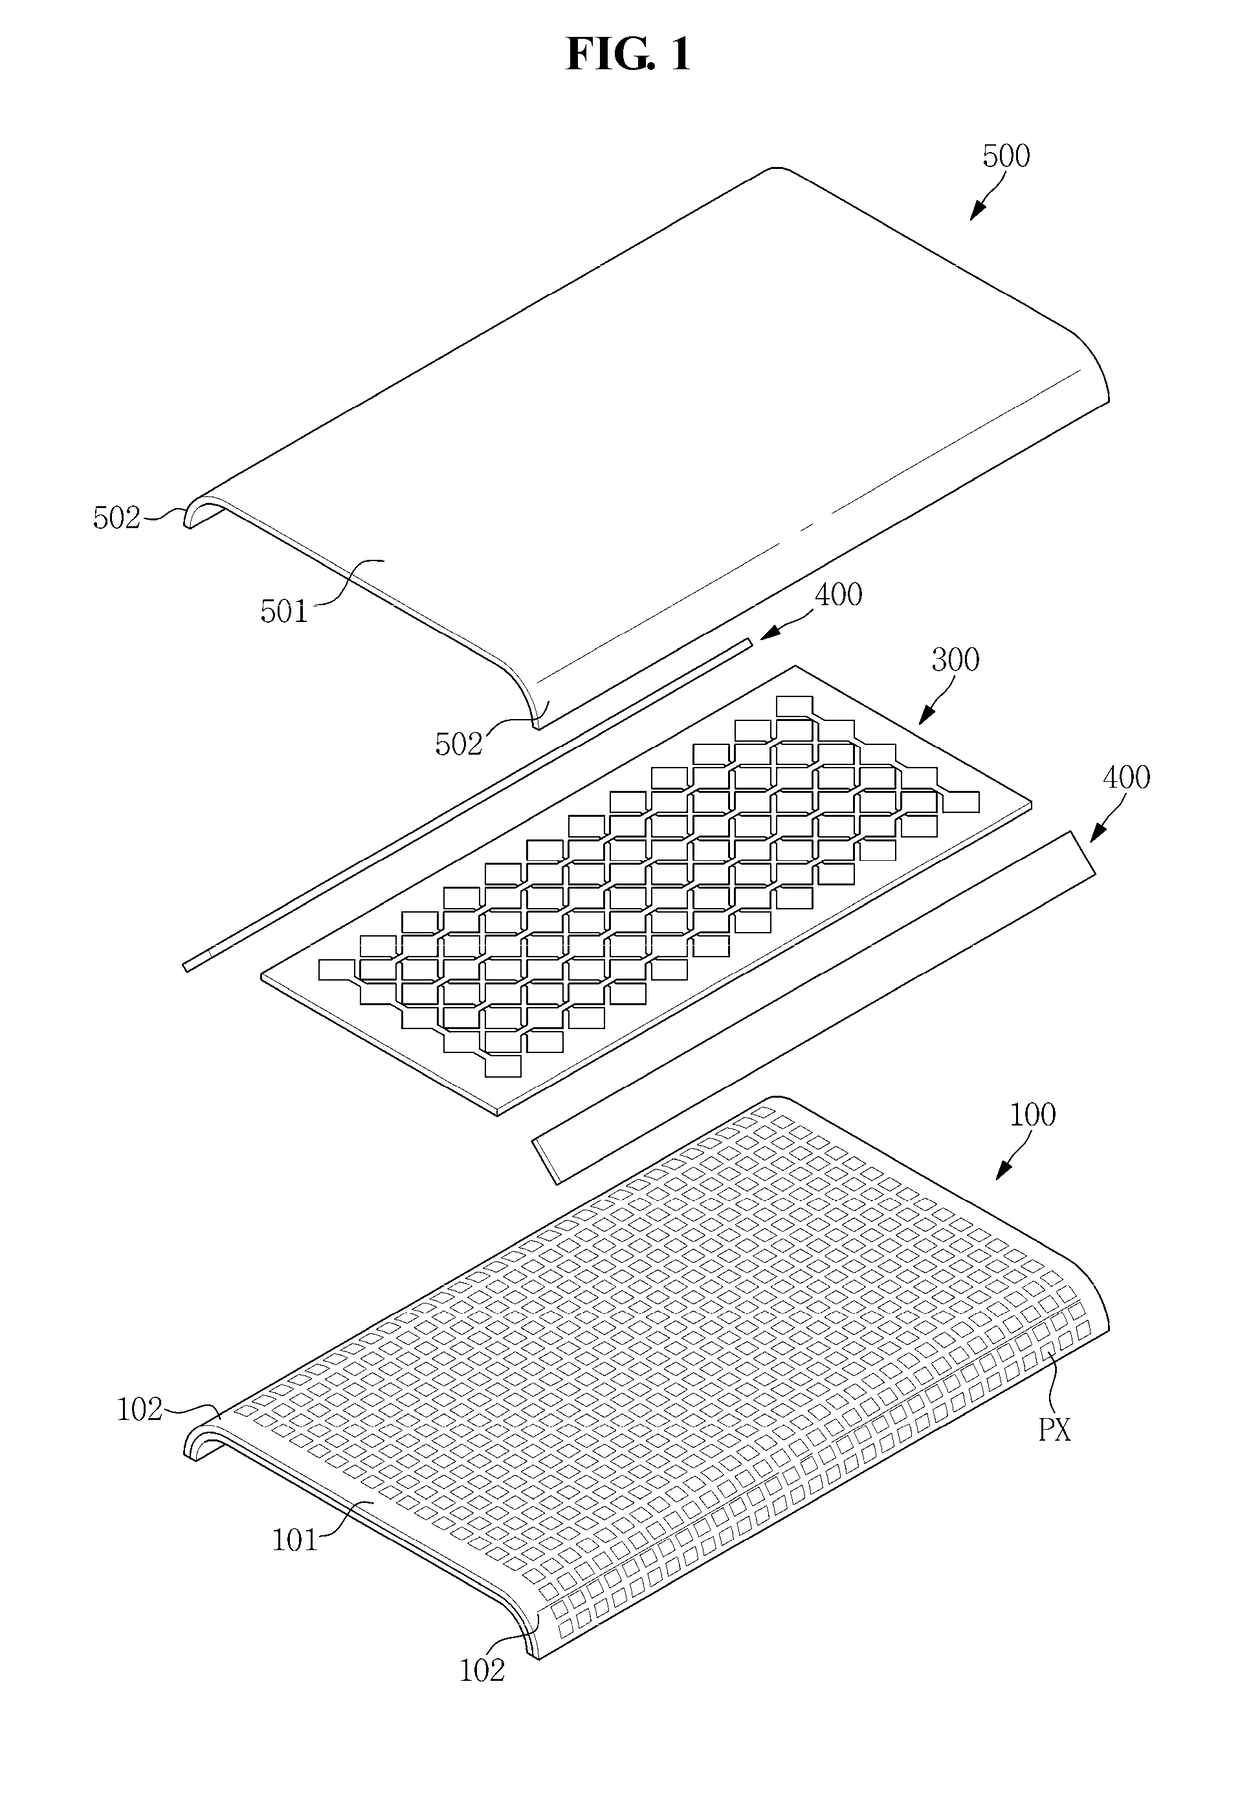 Display device having a planar surface portion and a curved surface portion